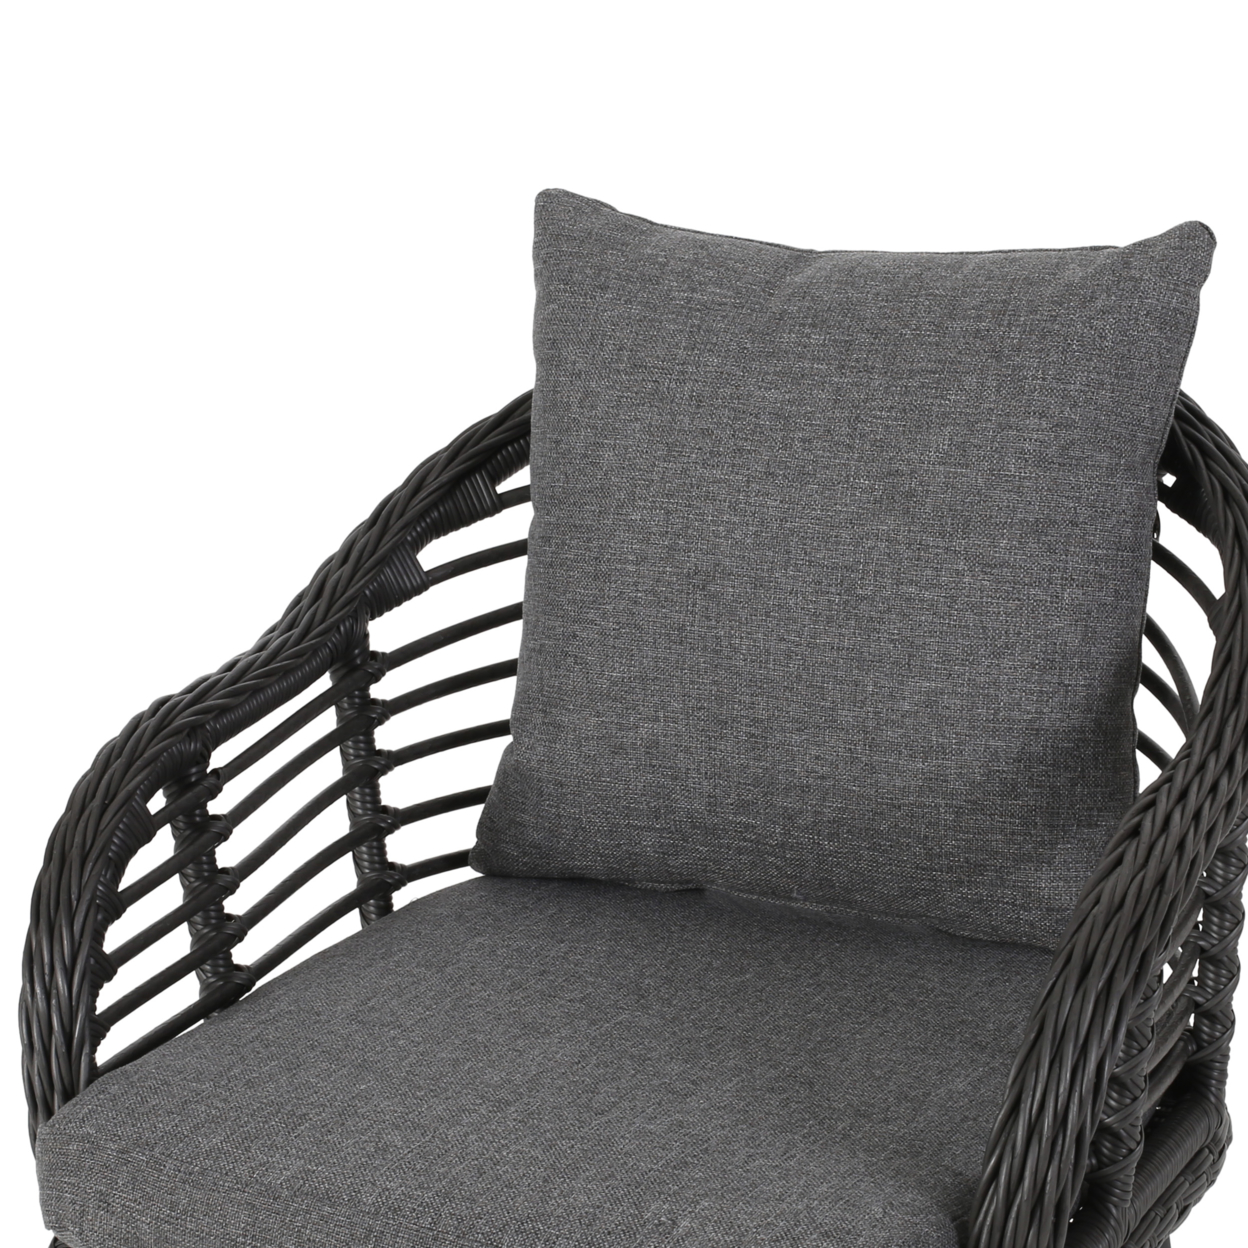 Becky Indoor Wicker Club Chairs With Cushions (Set Of 2) - Light Brown, Black, Beige